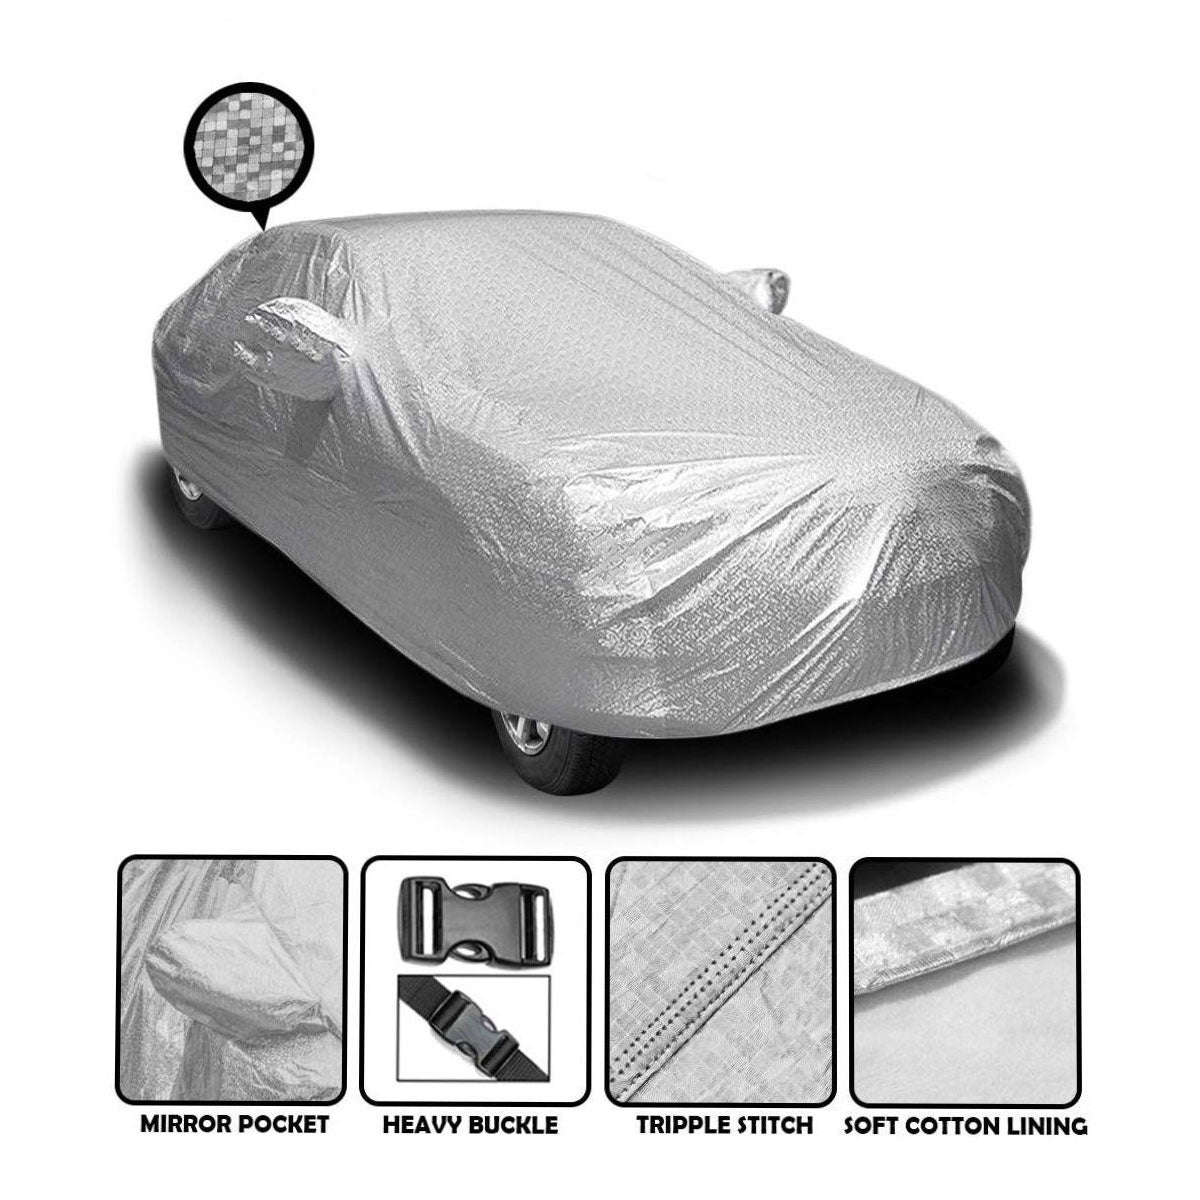 Oshotto Spyro Silver Anti Reflective, dustproof and Water Proof Car Body Cover with Mirror Pockets For Hyundai Verna Old